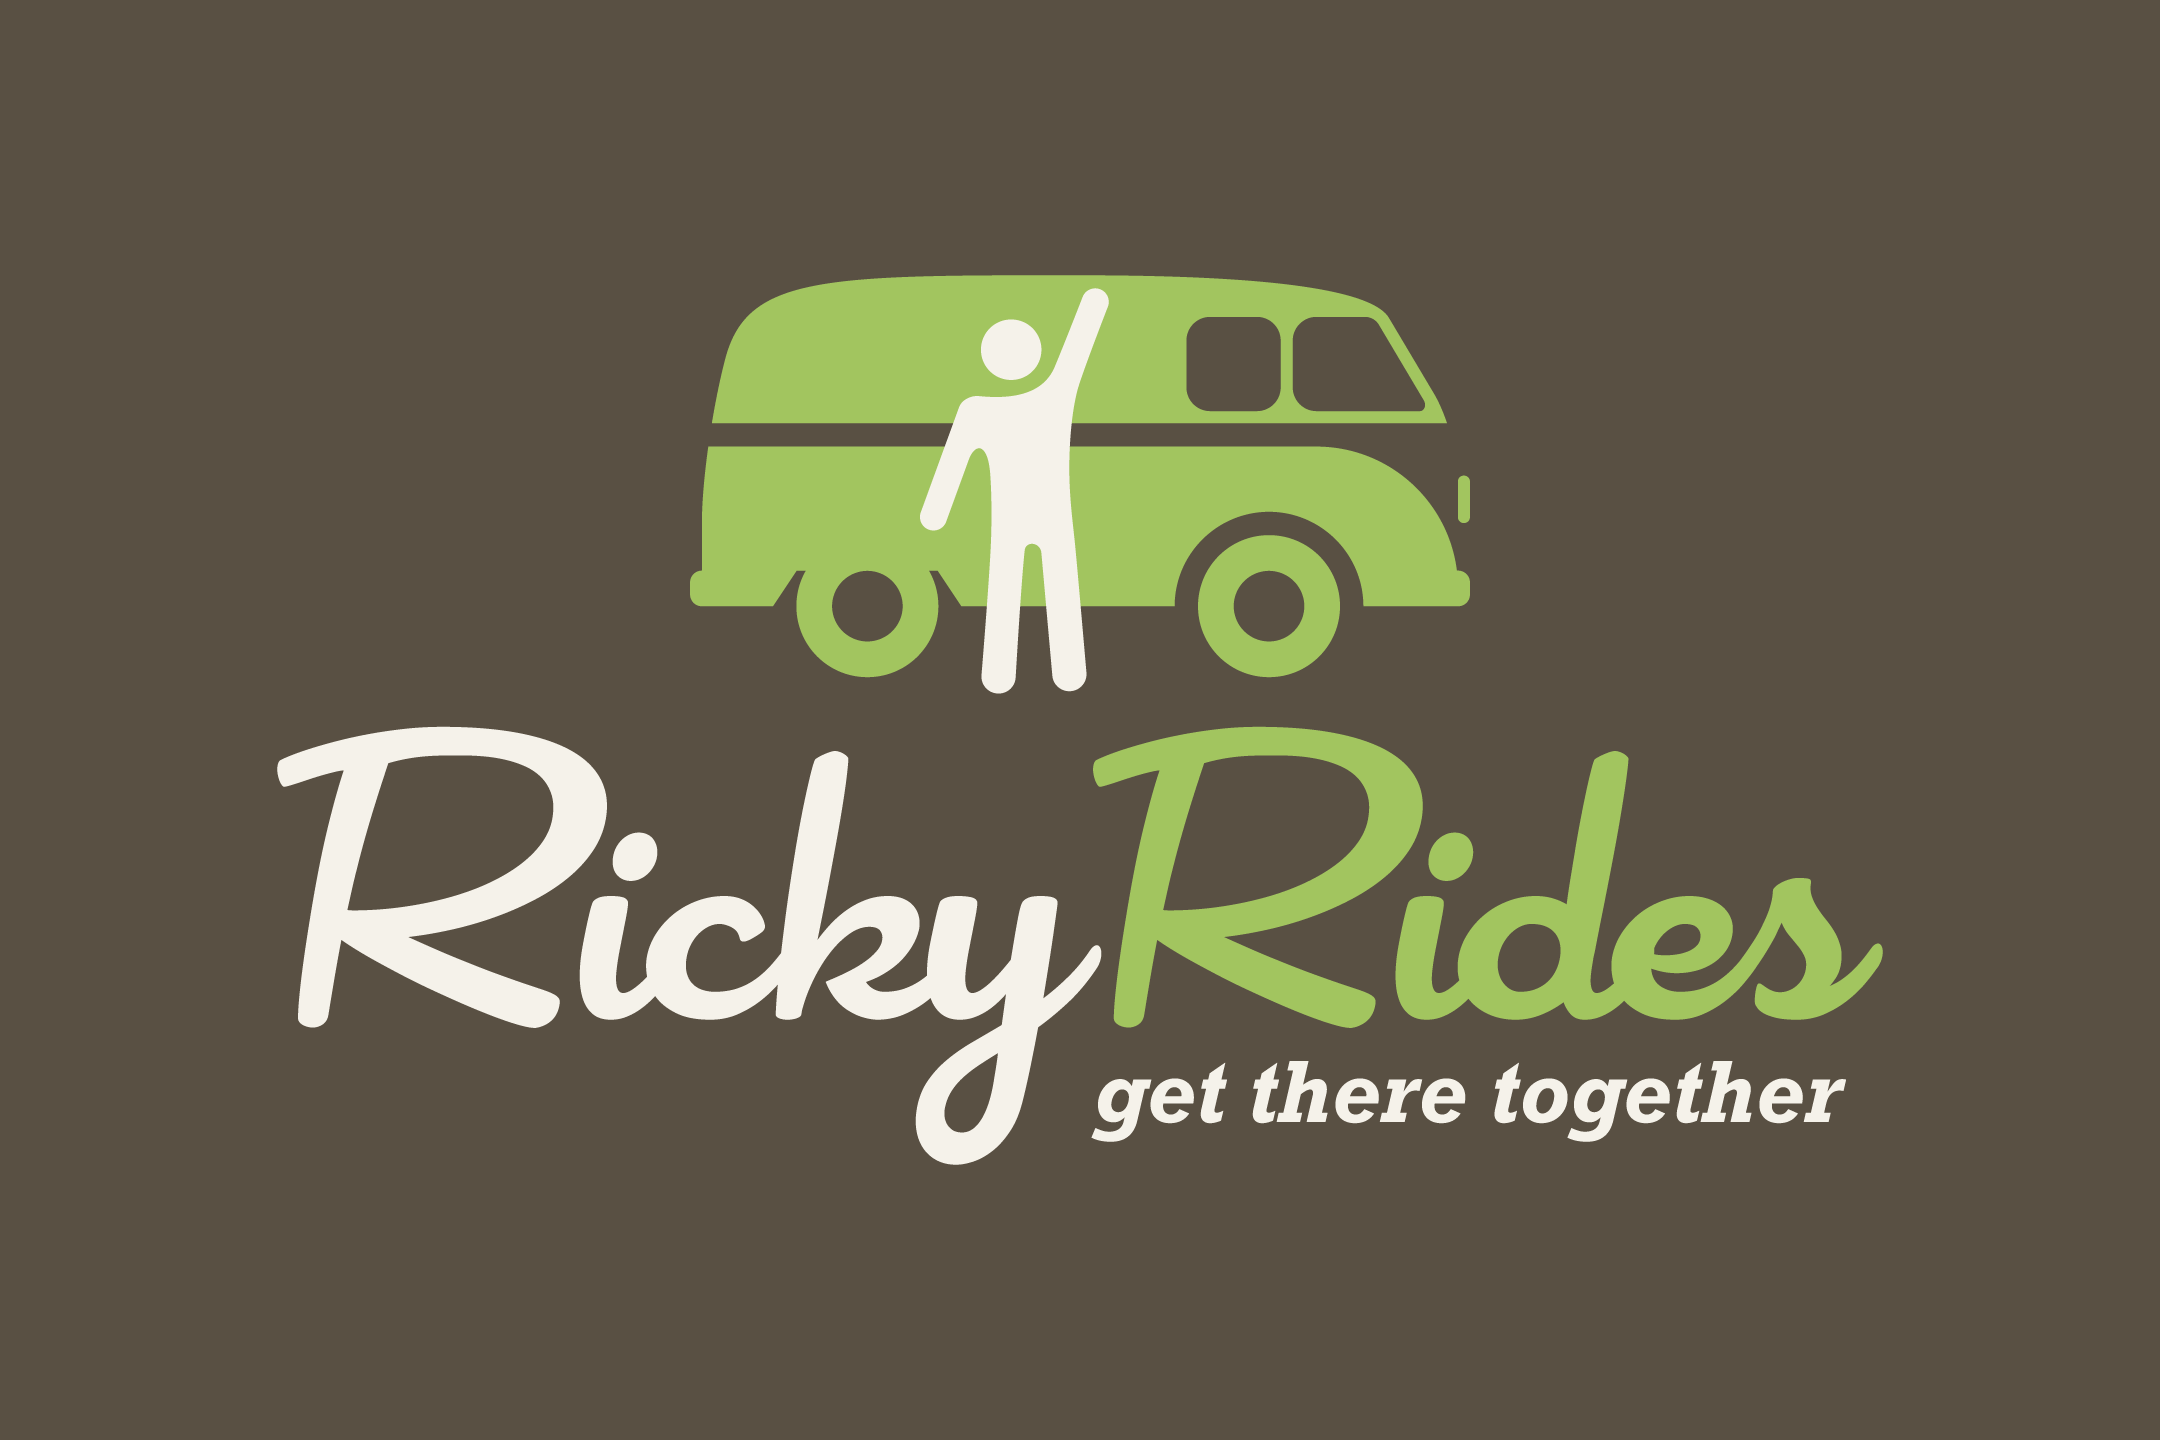 Brown and Green Logo - RickyRides | About